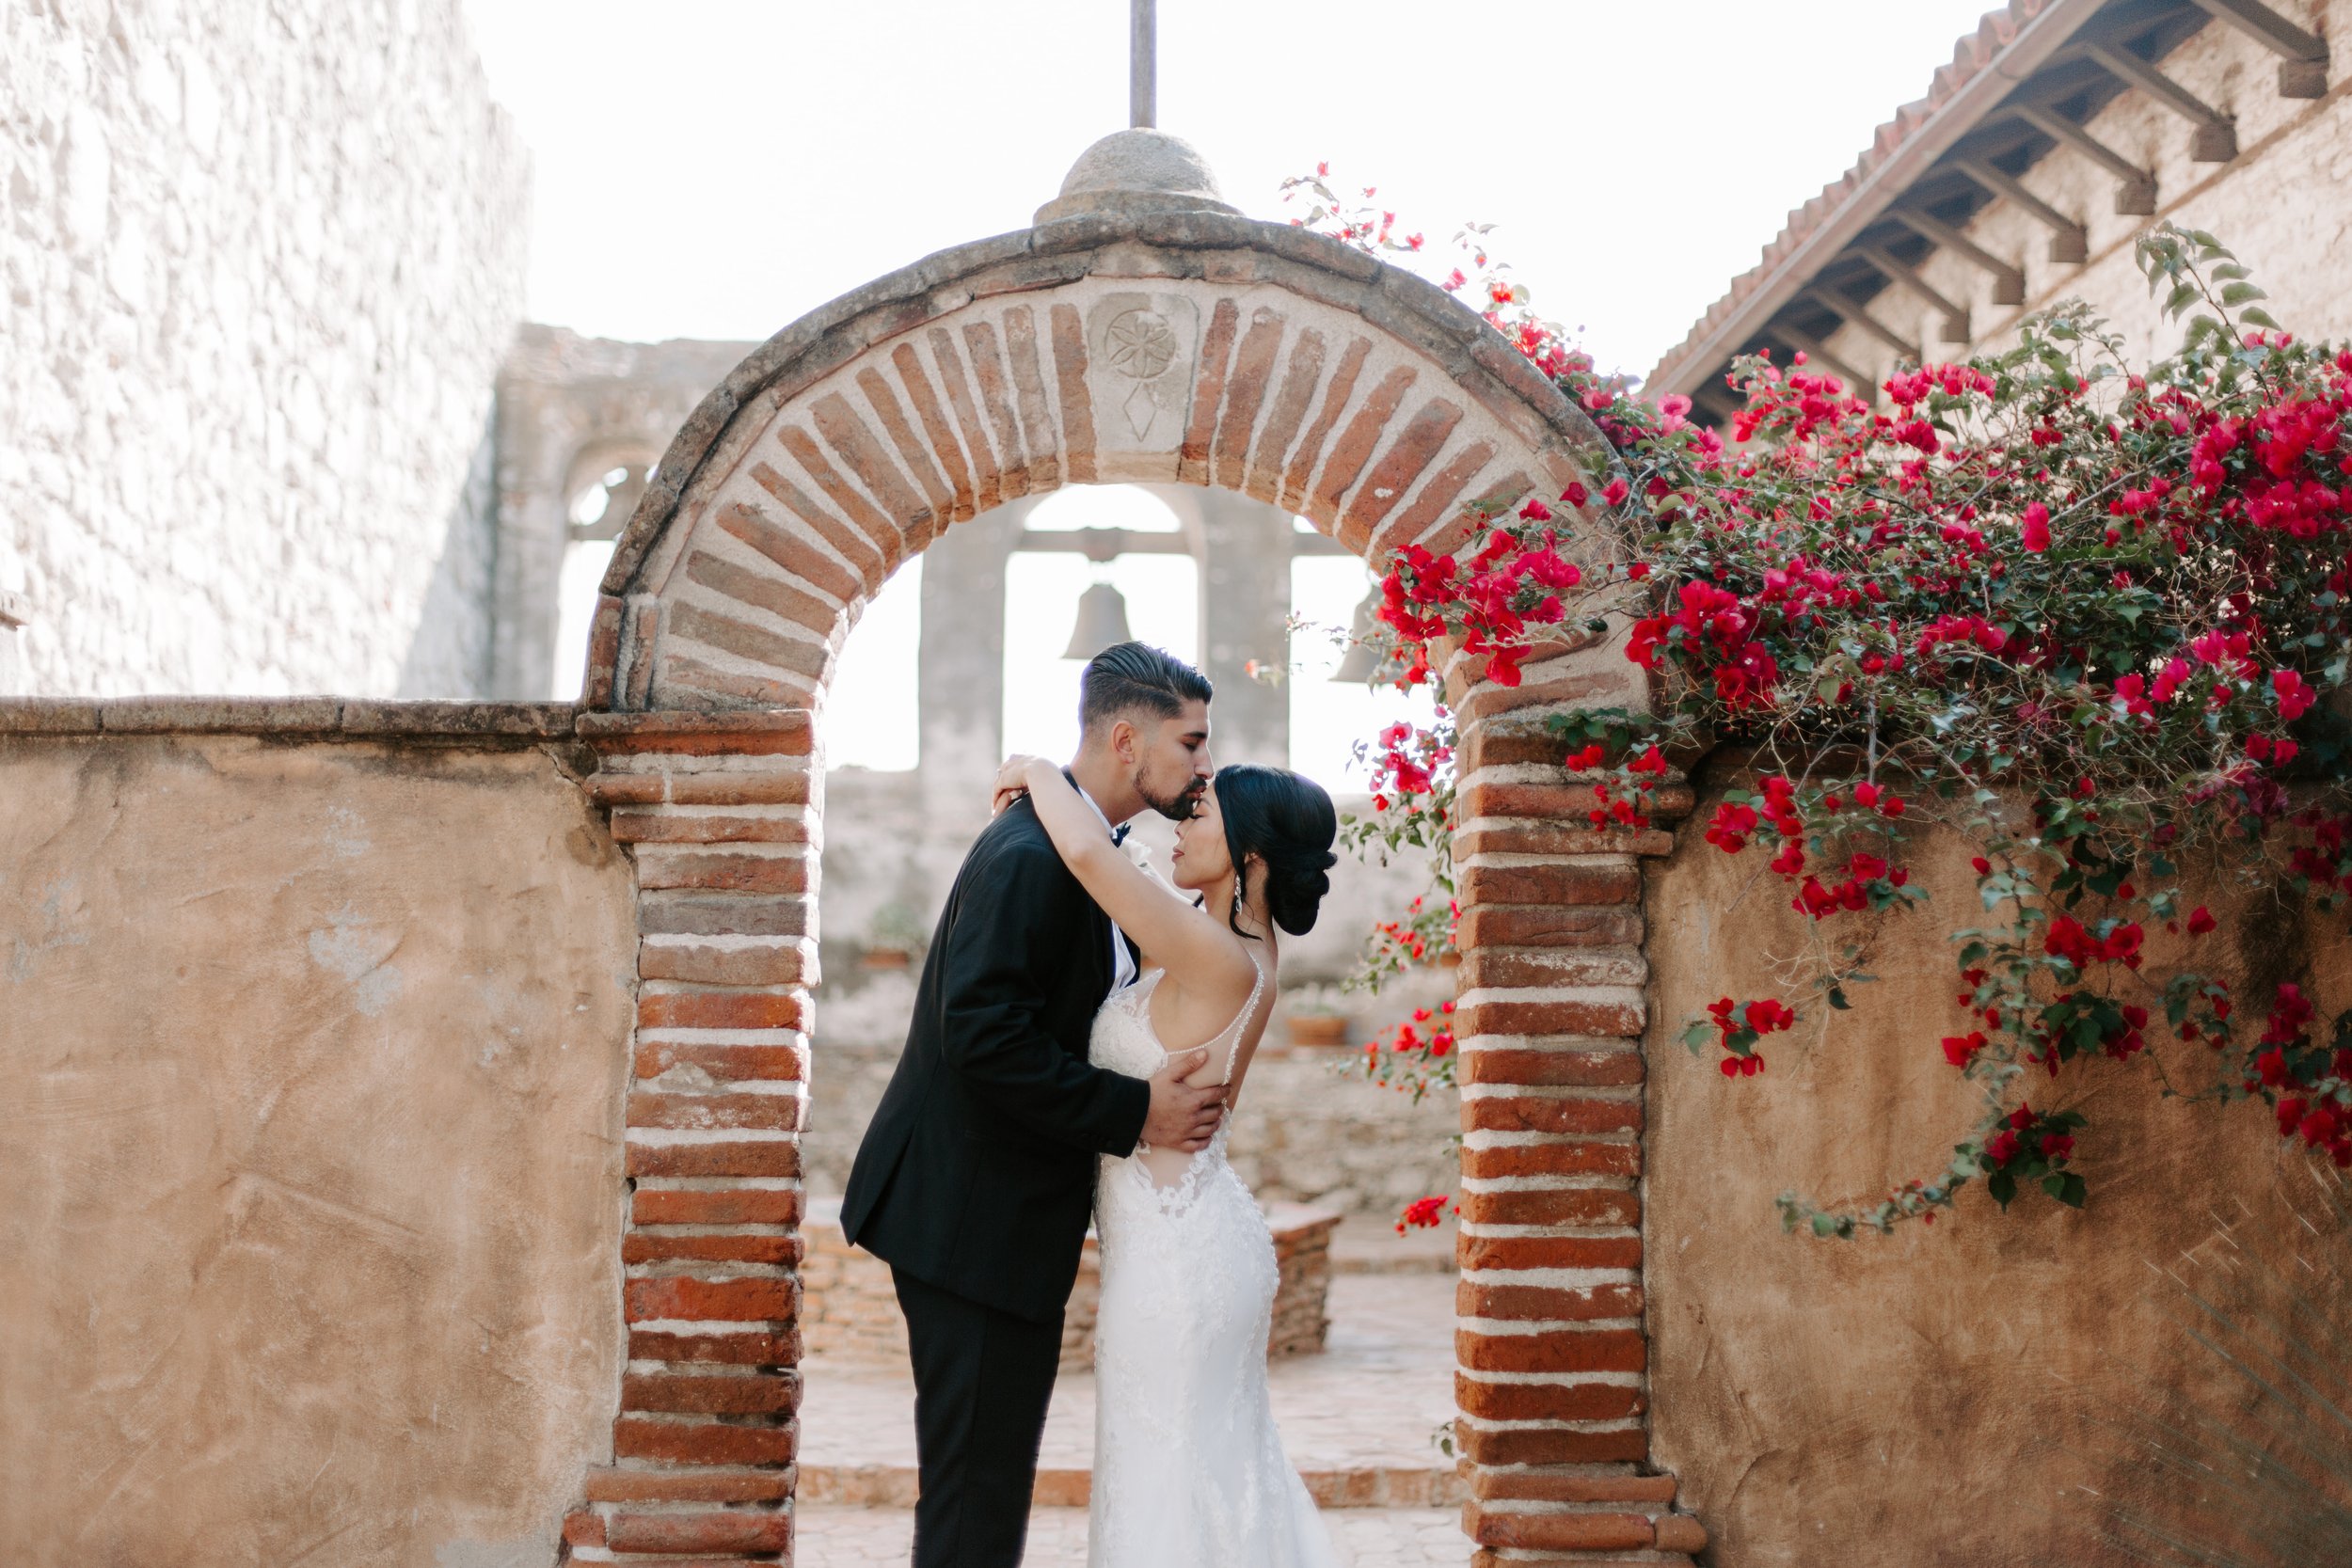 Ashley and Andrew Wedding at the San Juan Capistrano Mission and the Franciscan Gardens by Kara Reynolds Photography278.jpg